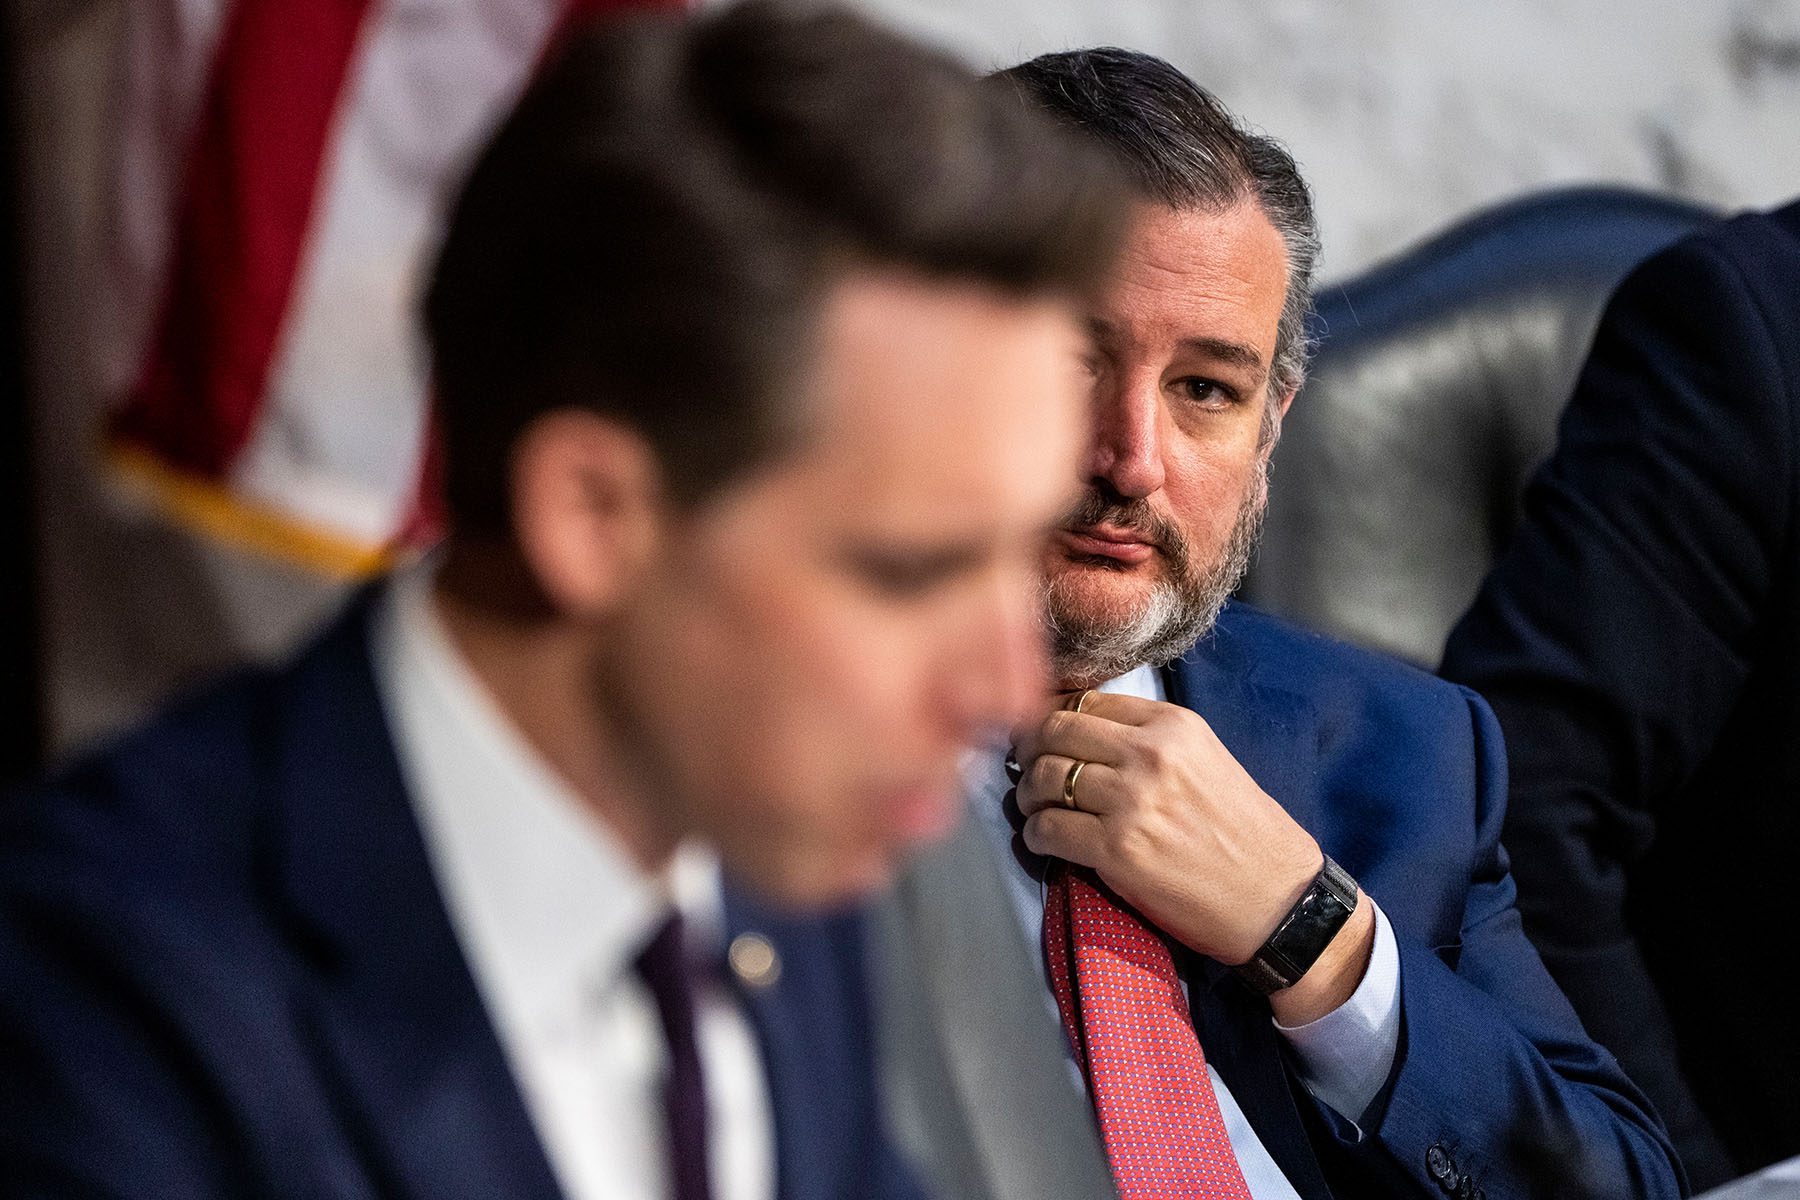 Sen. Ted Cruz adjusts his tie as Sen. Josh Hawley speaks during a meeting. Josh Hawley is blurred in the foreground, while Ted Cruz is in focus in the background.